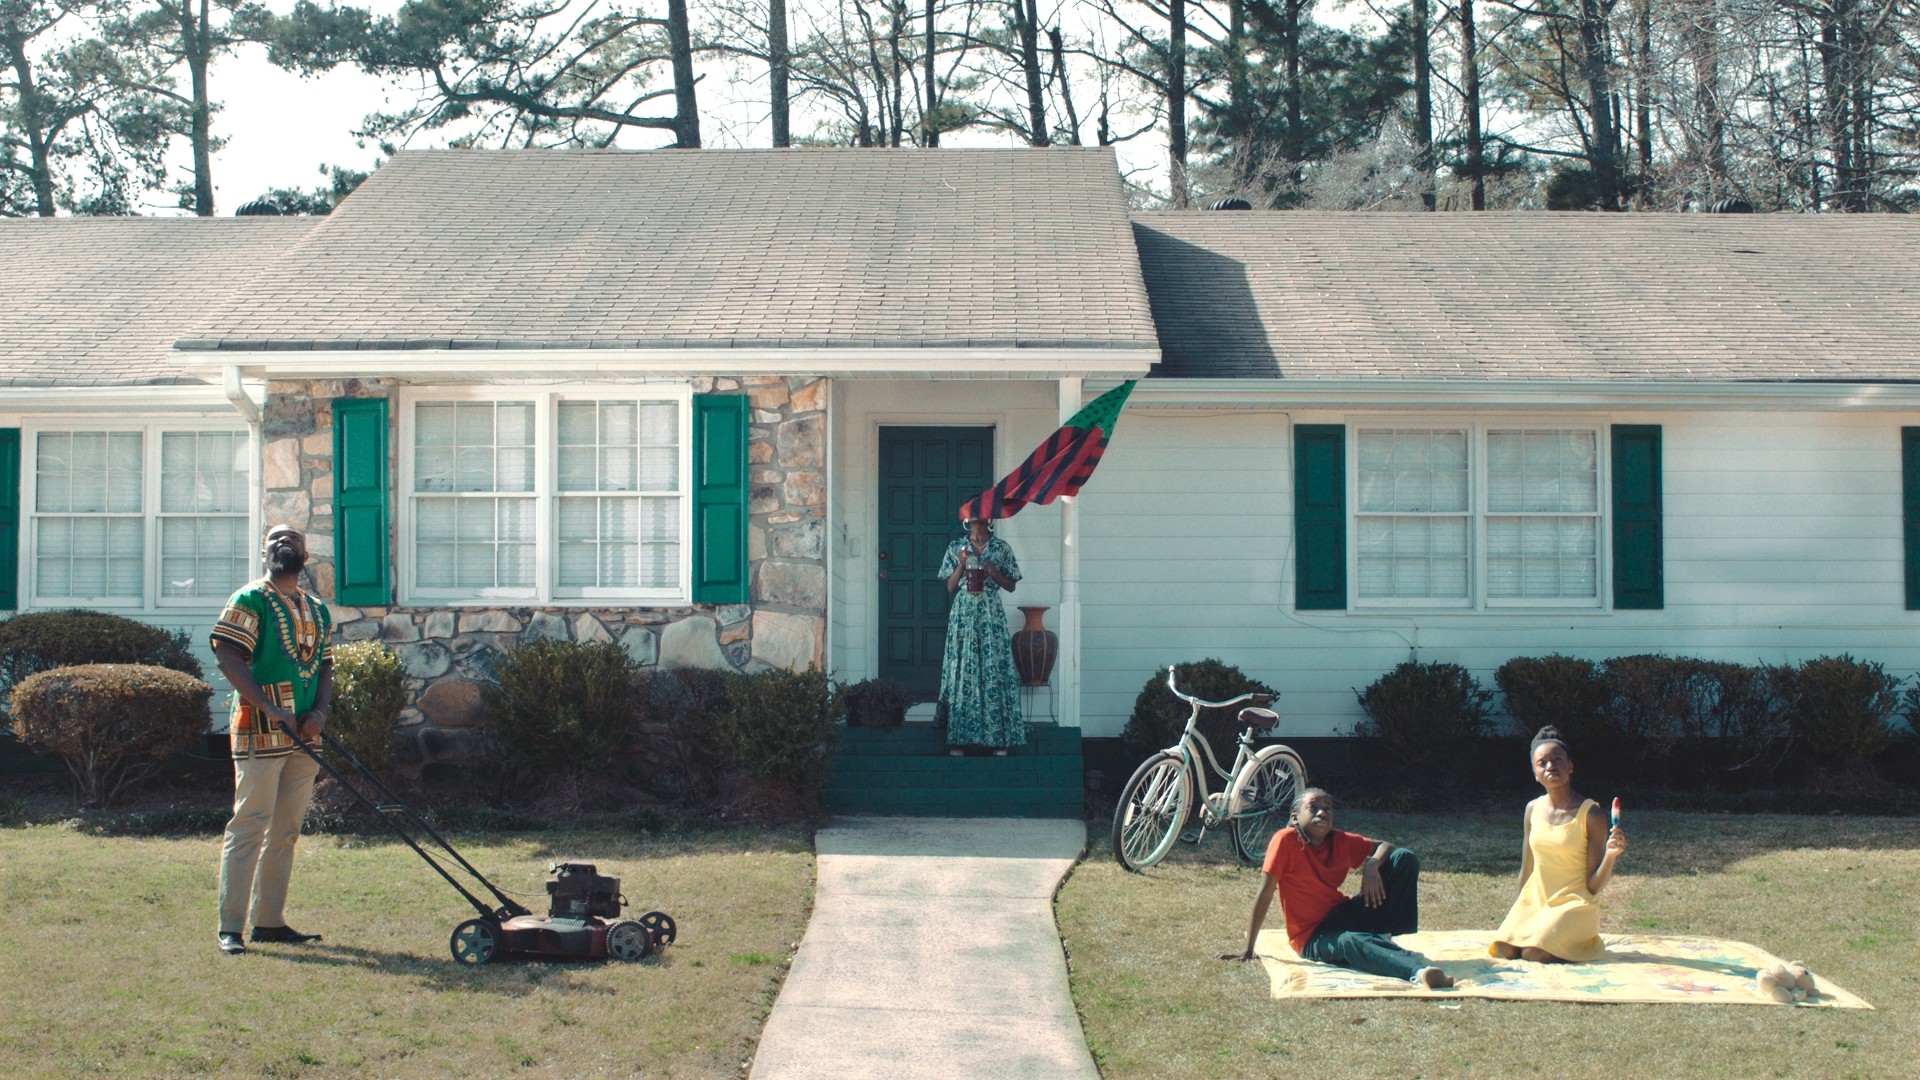 Still from Eyes on the Prize: Hallowed Ground shows a Black family in a deceptively idyllic scene — two children having a picnic on one side of the lawn as a parent mows the other side. On the steps of the home stands the other parent, perhaps the mother, but their face is obscured by a an American flag represented in the colors of red, black, and green. The three people whose faces are visible are all looking up at something in the sky.